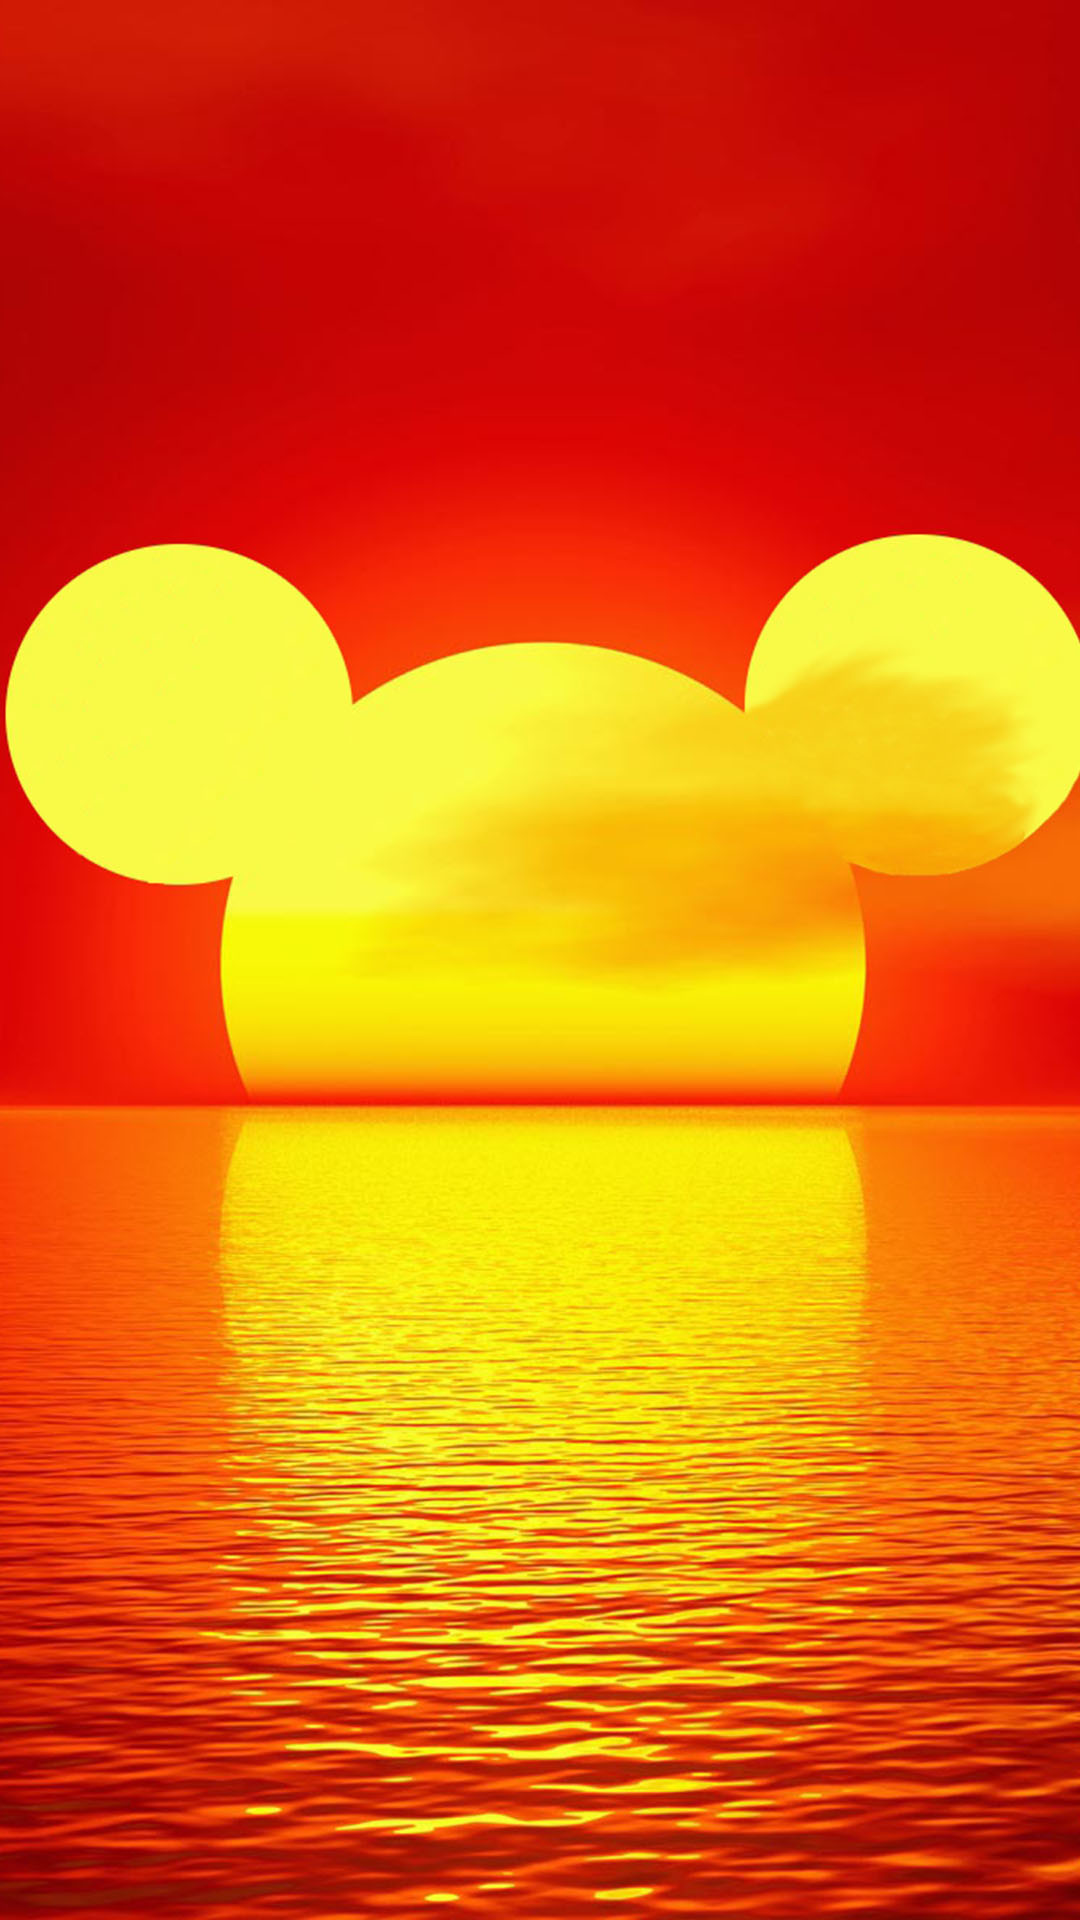 cute disney wallpapers for iphone,yellow,red,orange,love,heart